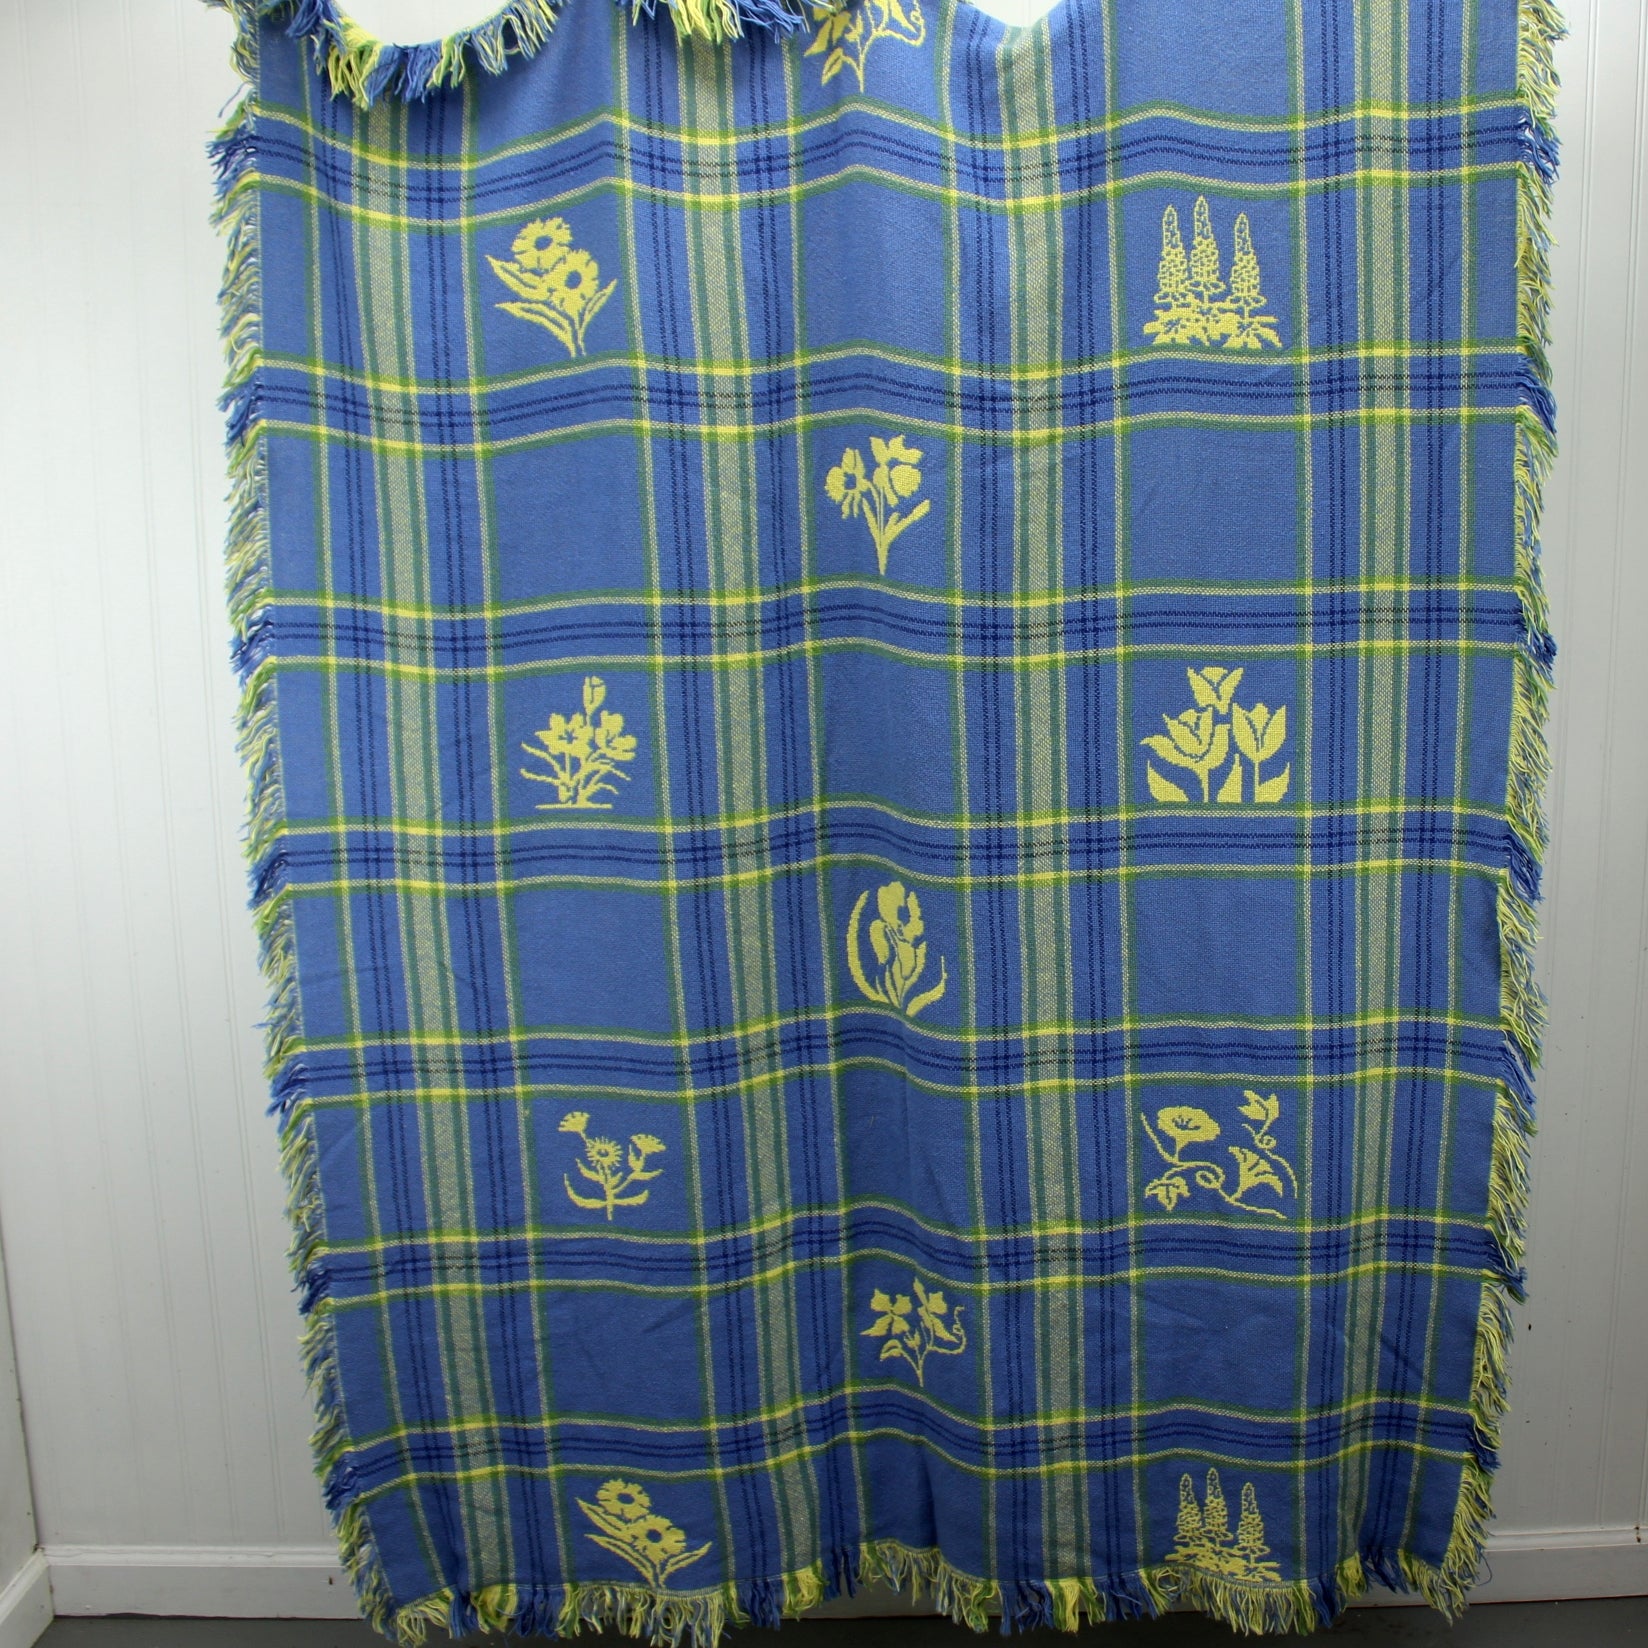 Cotton Throw Blanket Yellow Periwinkle Blue Plaid Squares Wildflowers full view blue side